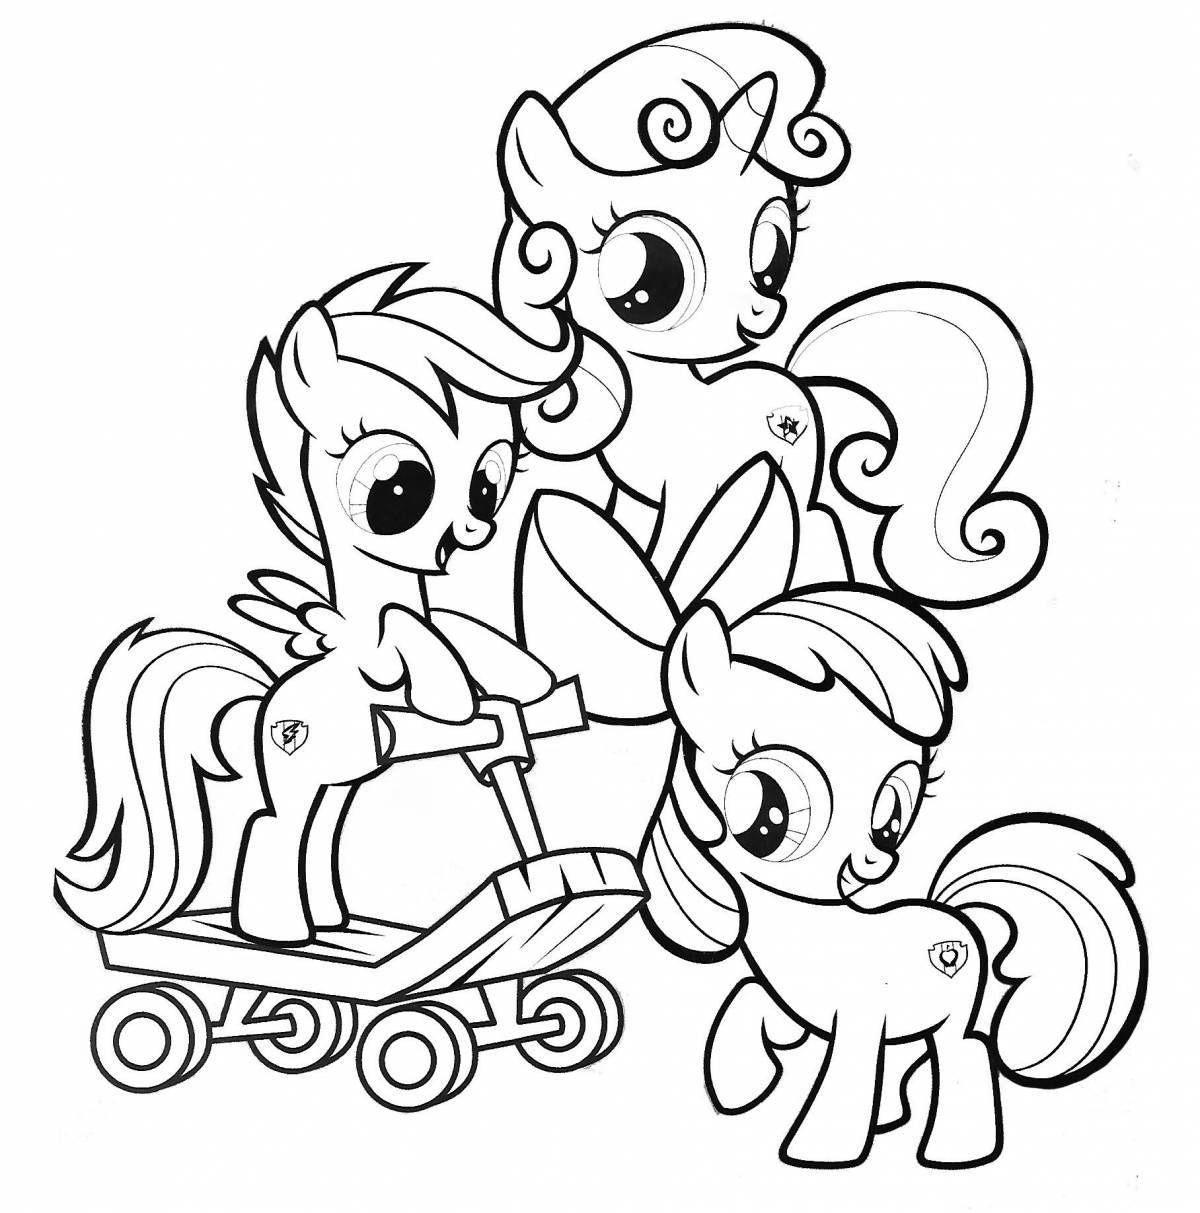 Exciting coloring all the ponies together